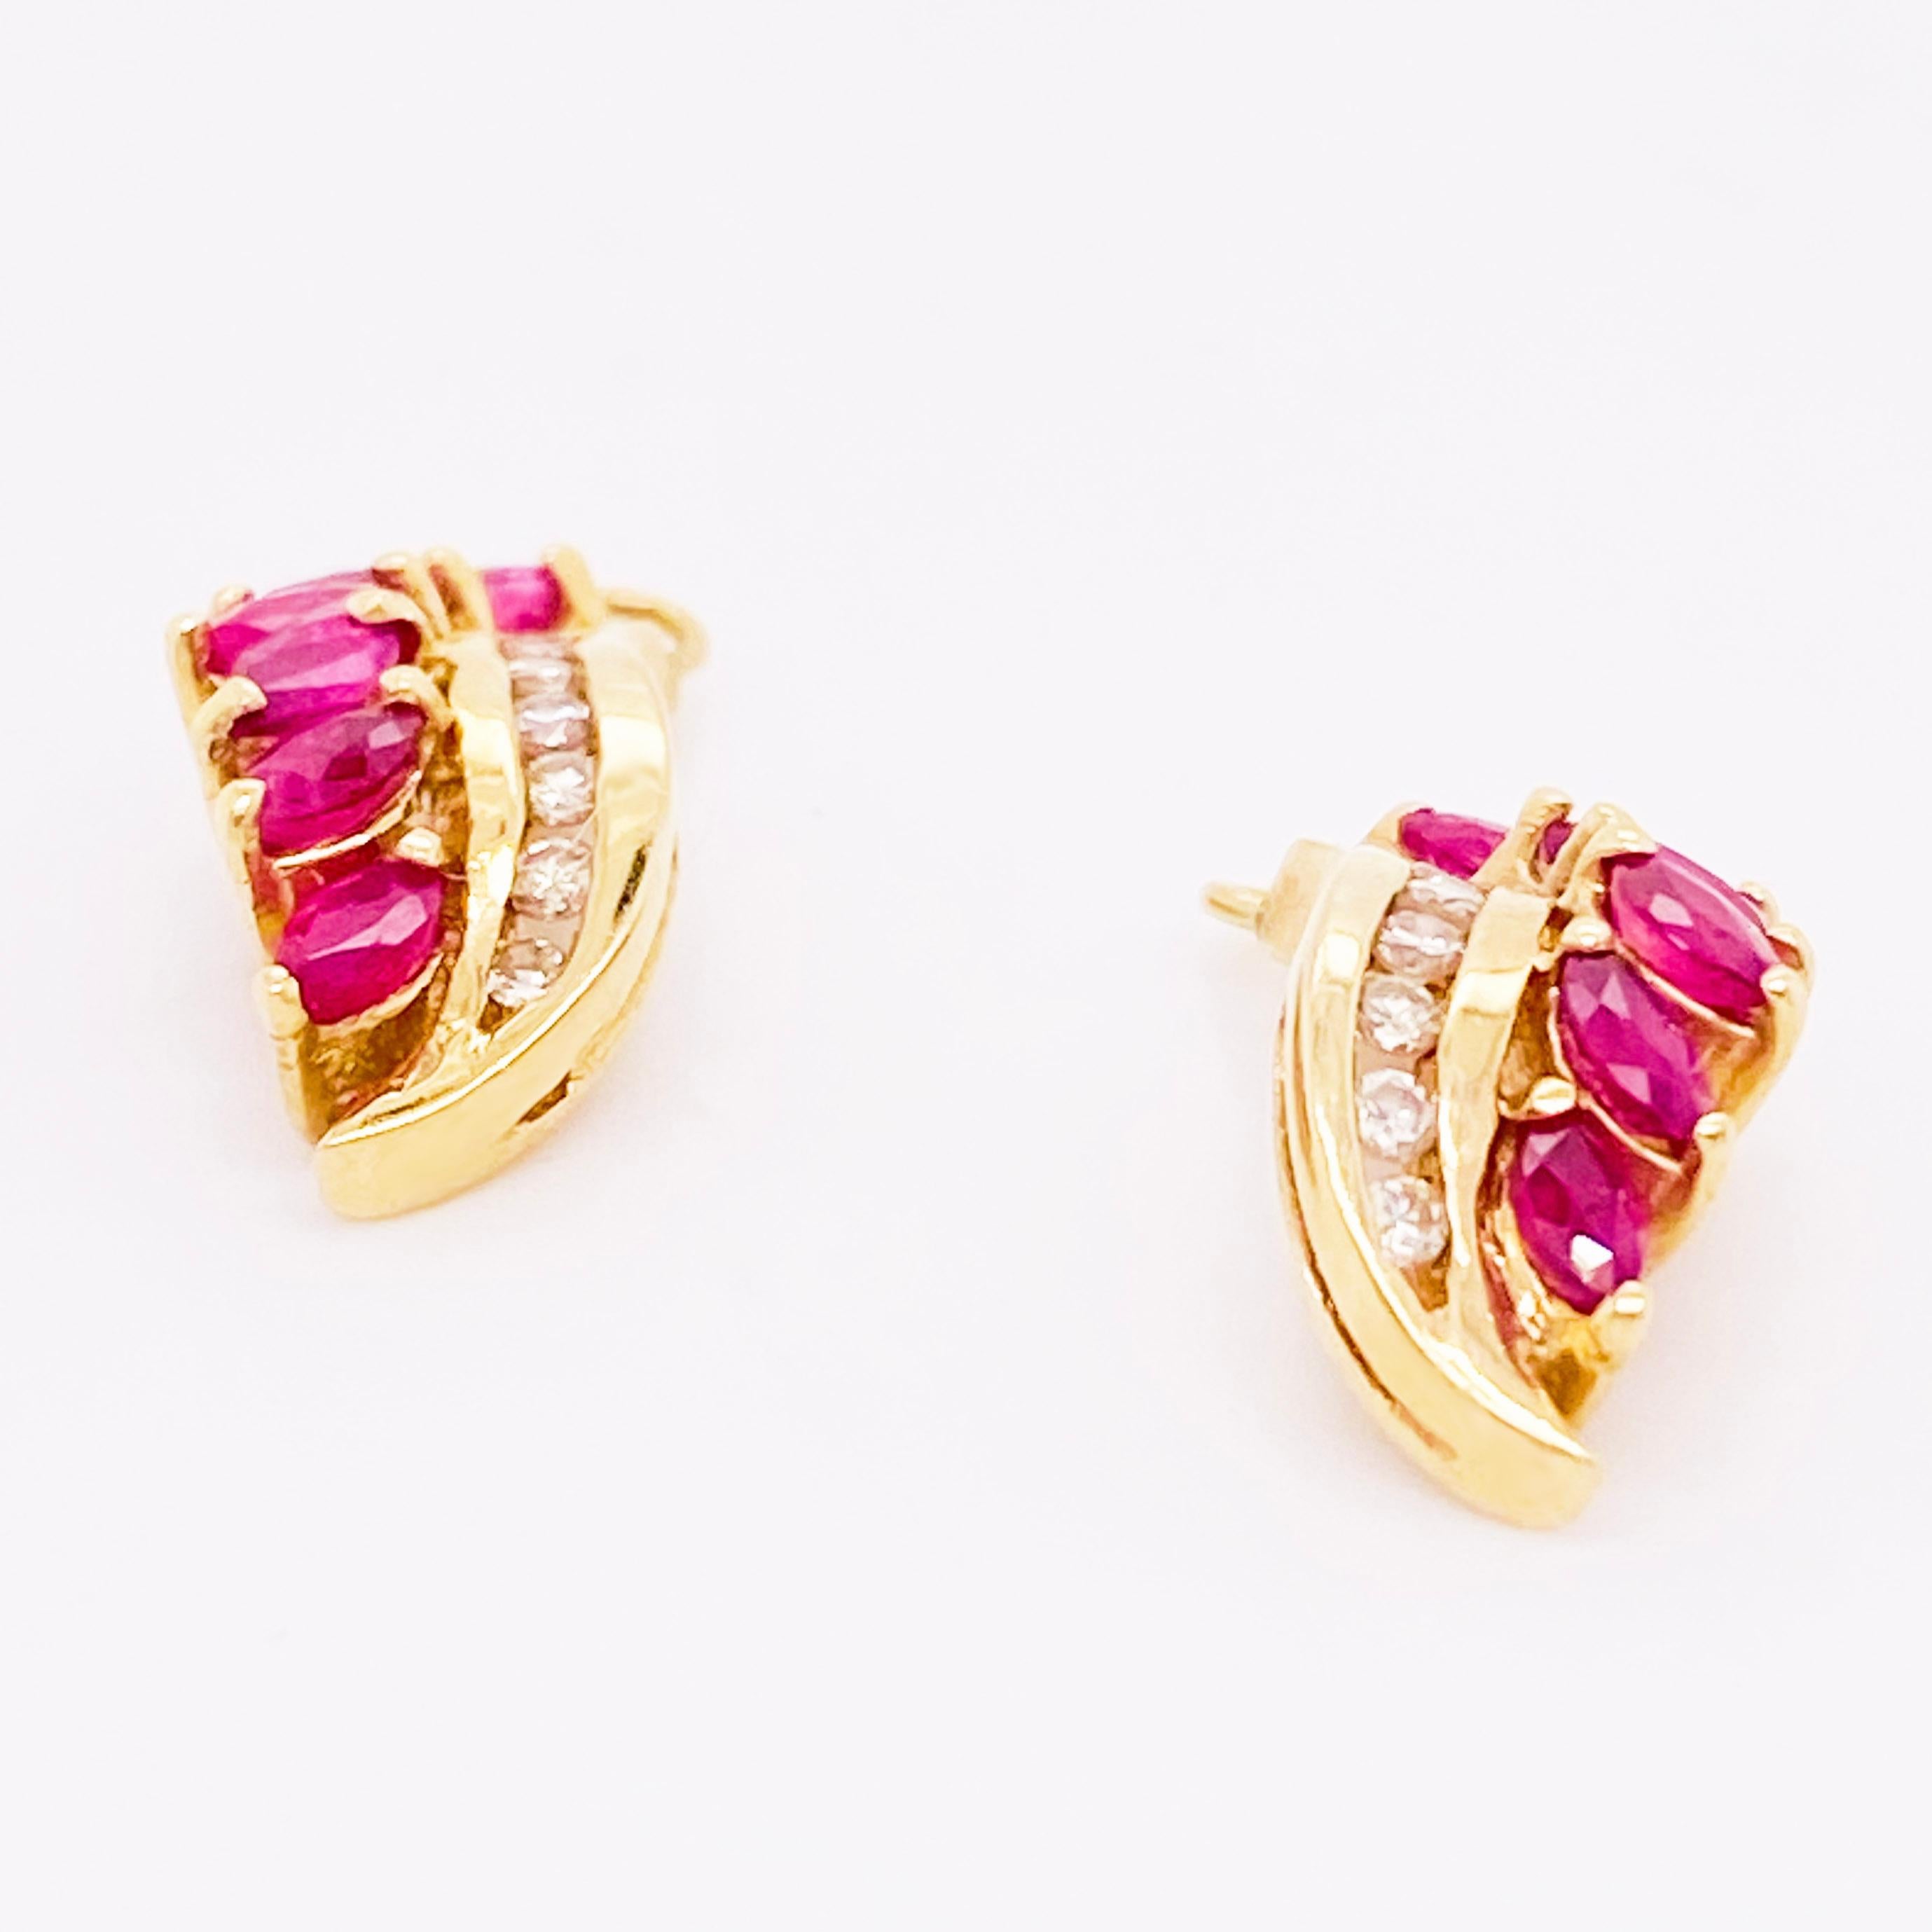 Round Cut Ruby Earring Jackets, Red Ruby and Diamond in 14 Karat White Gold Earring Charms